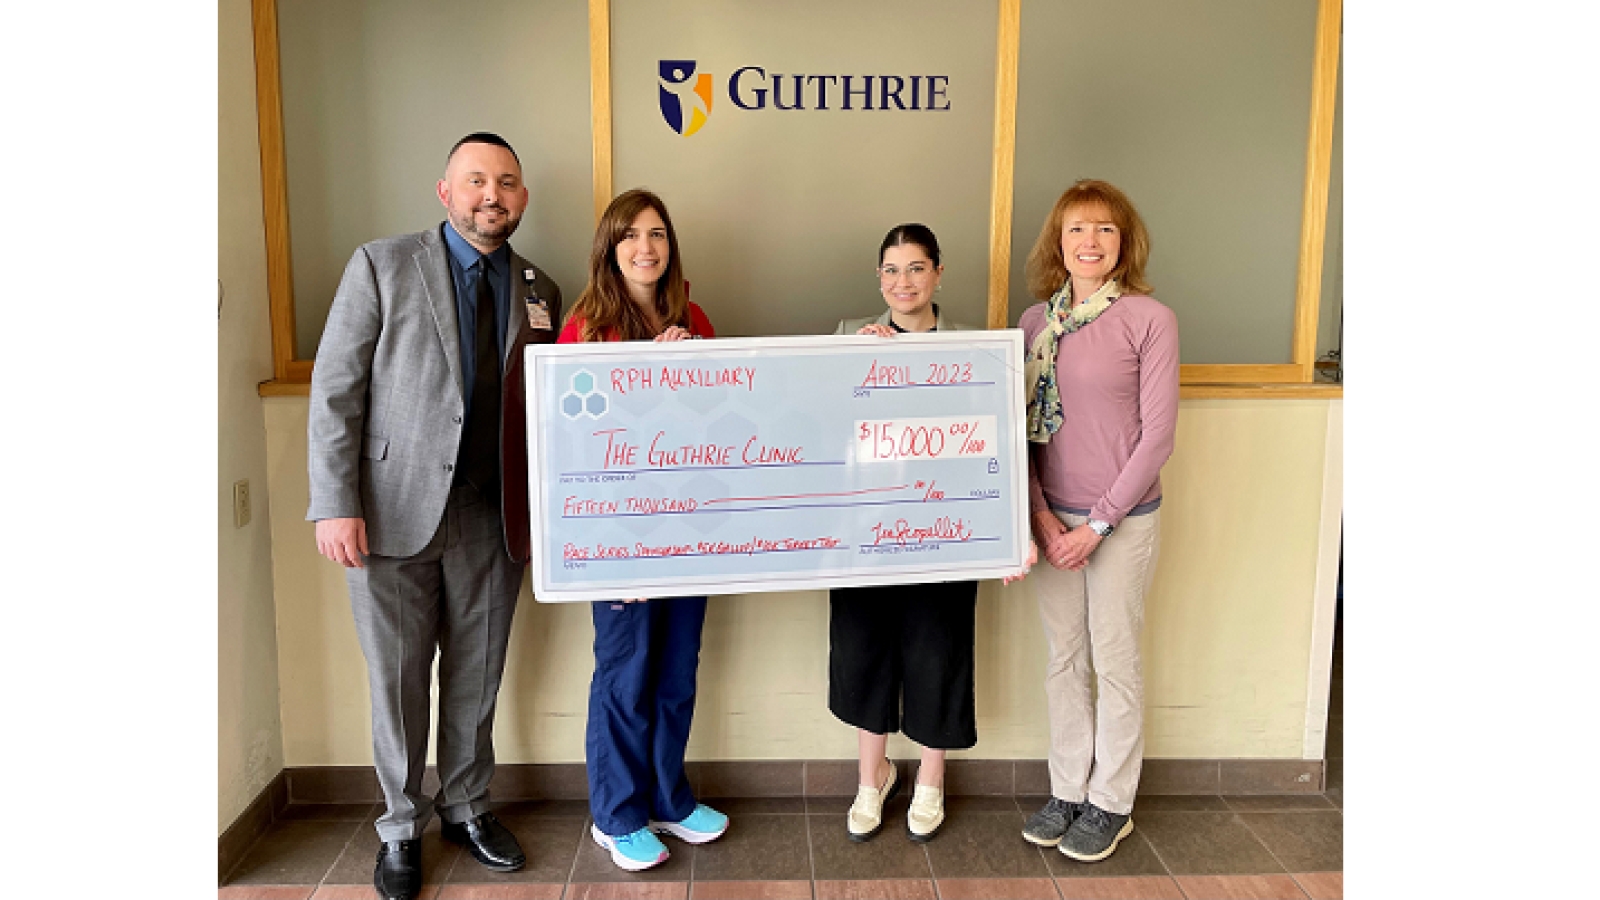 Pictured from left to right: Brian Howland, Guthrie Gallop Committee Member; Kelly Brown, Guthrie Gallop Committee Member; Lea Scopelliti, RPH Auxiliary Member; Beth Herbst, RPH Auxiliary Member.